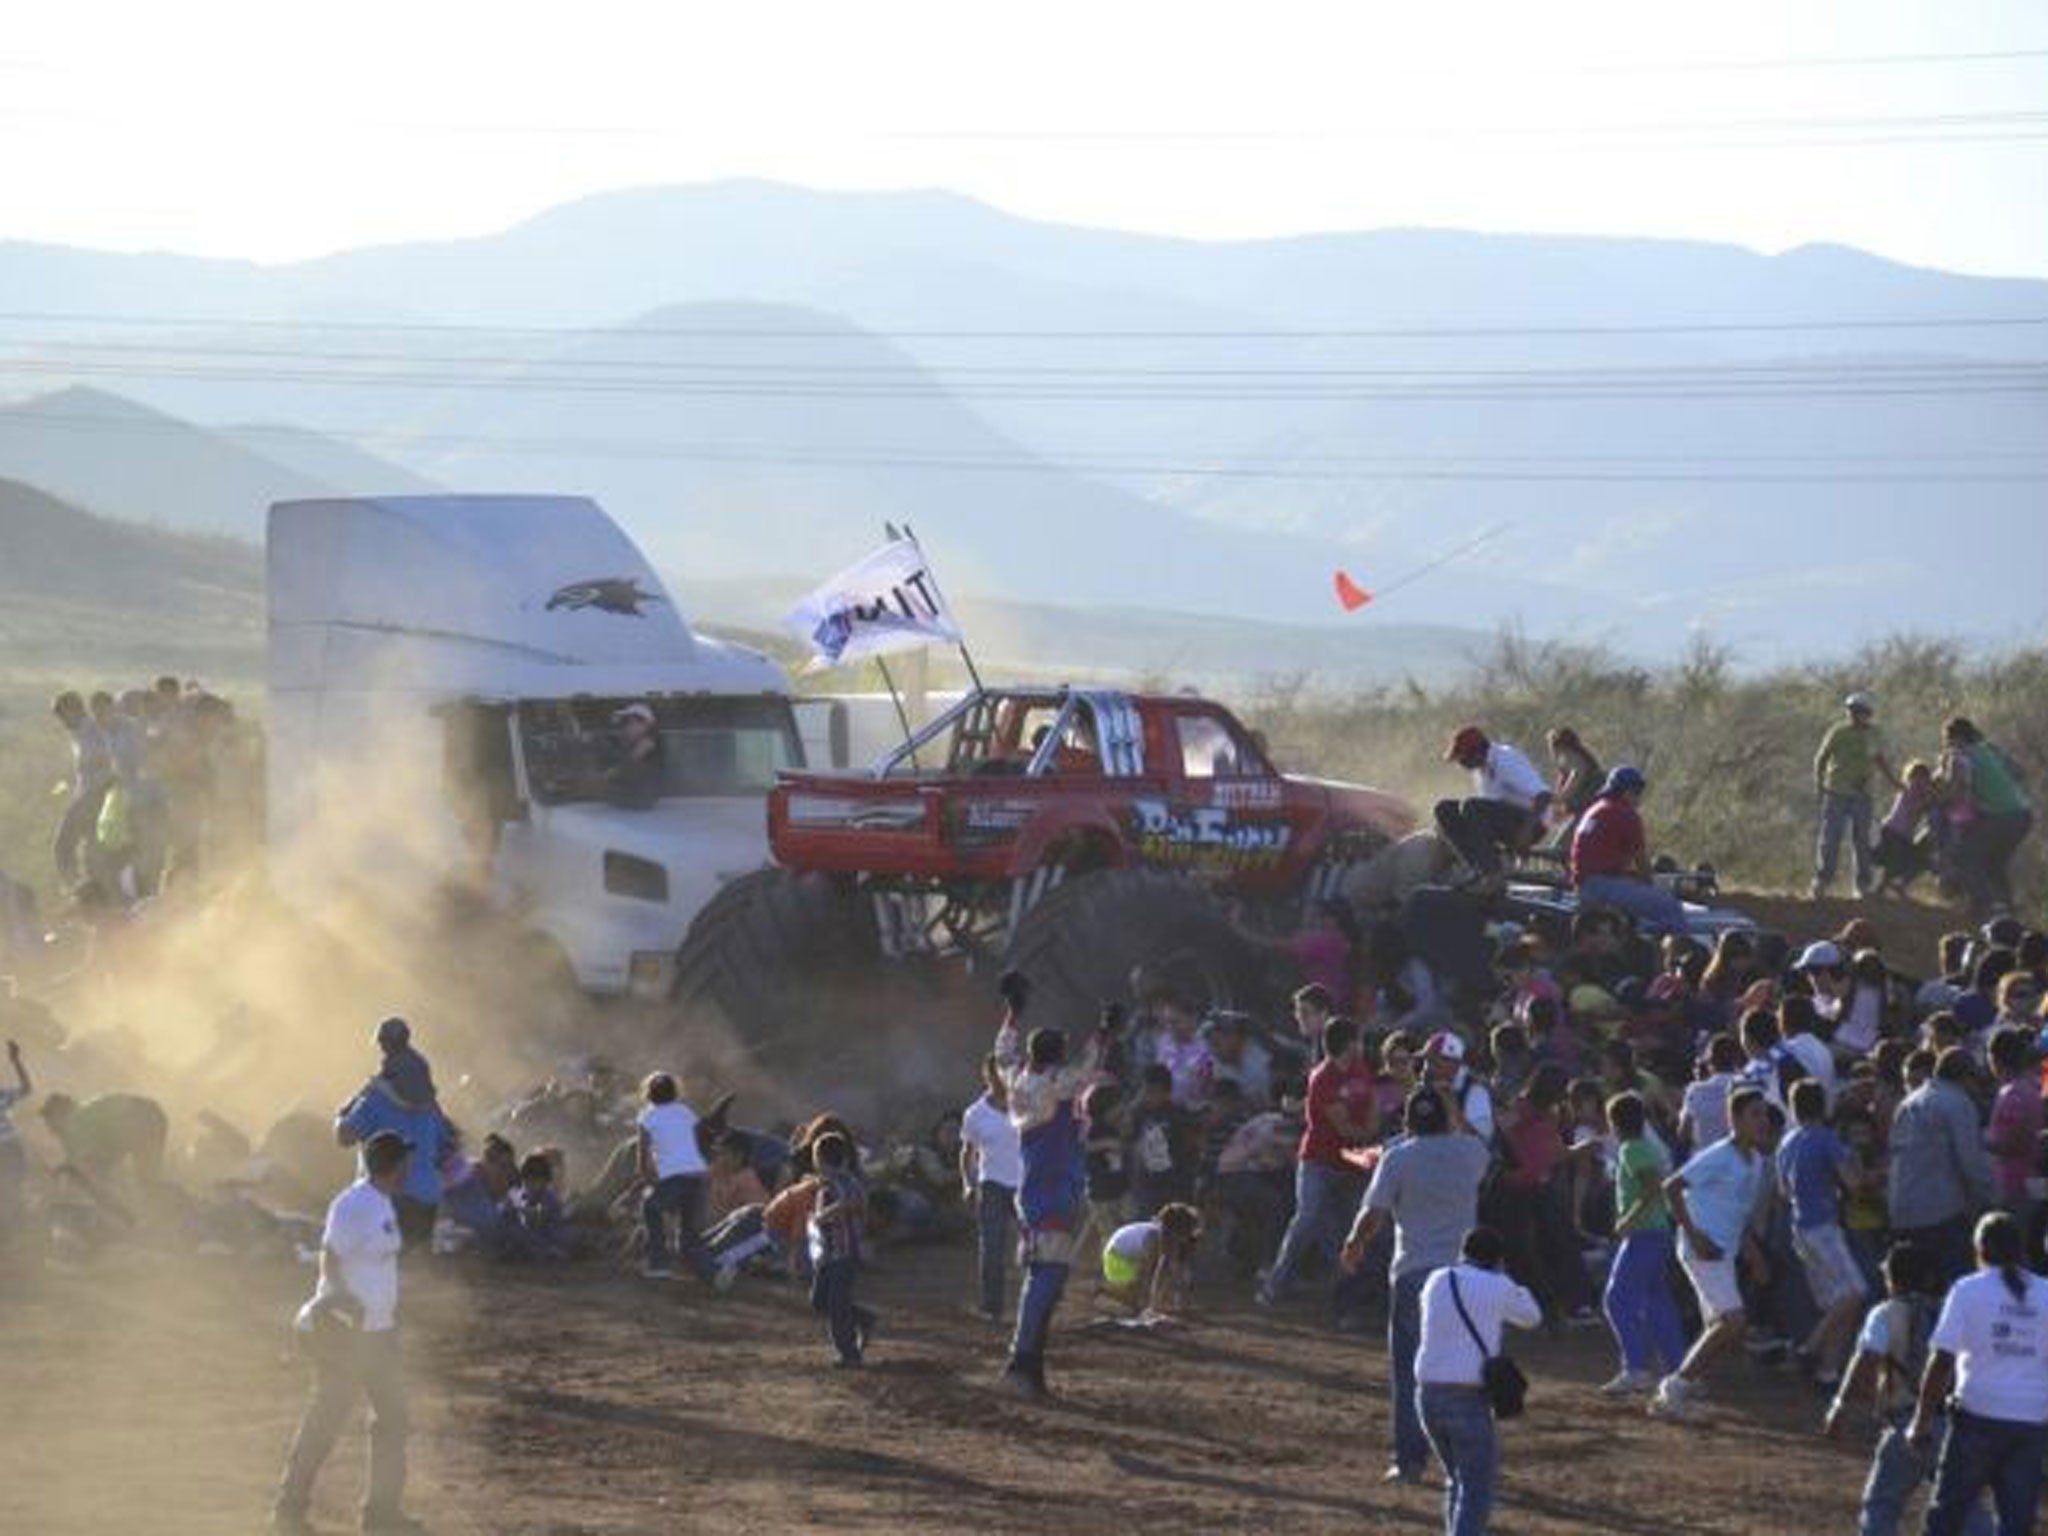 A monster truck rams into spectators during a monster truck rally show at El Rejon park, on the outskirts of Chihuahua